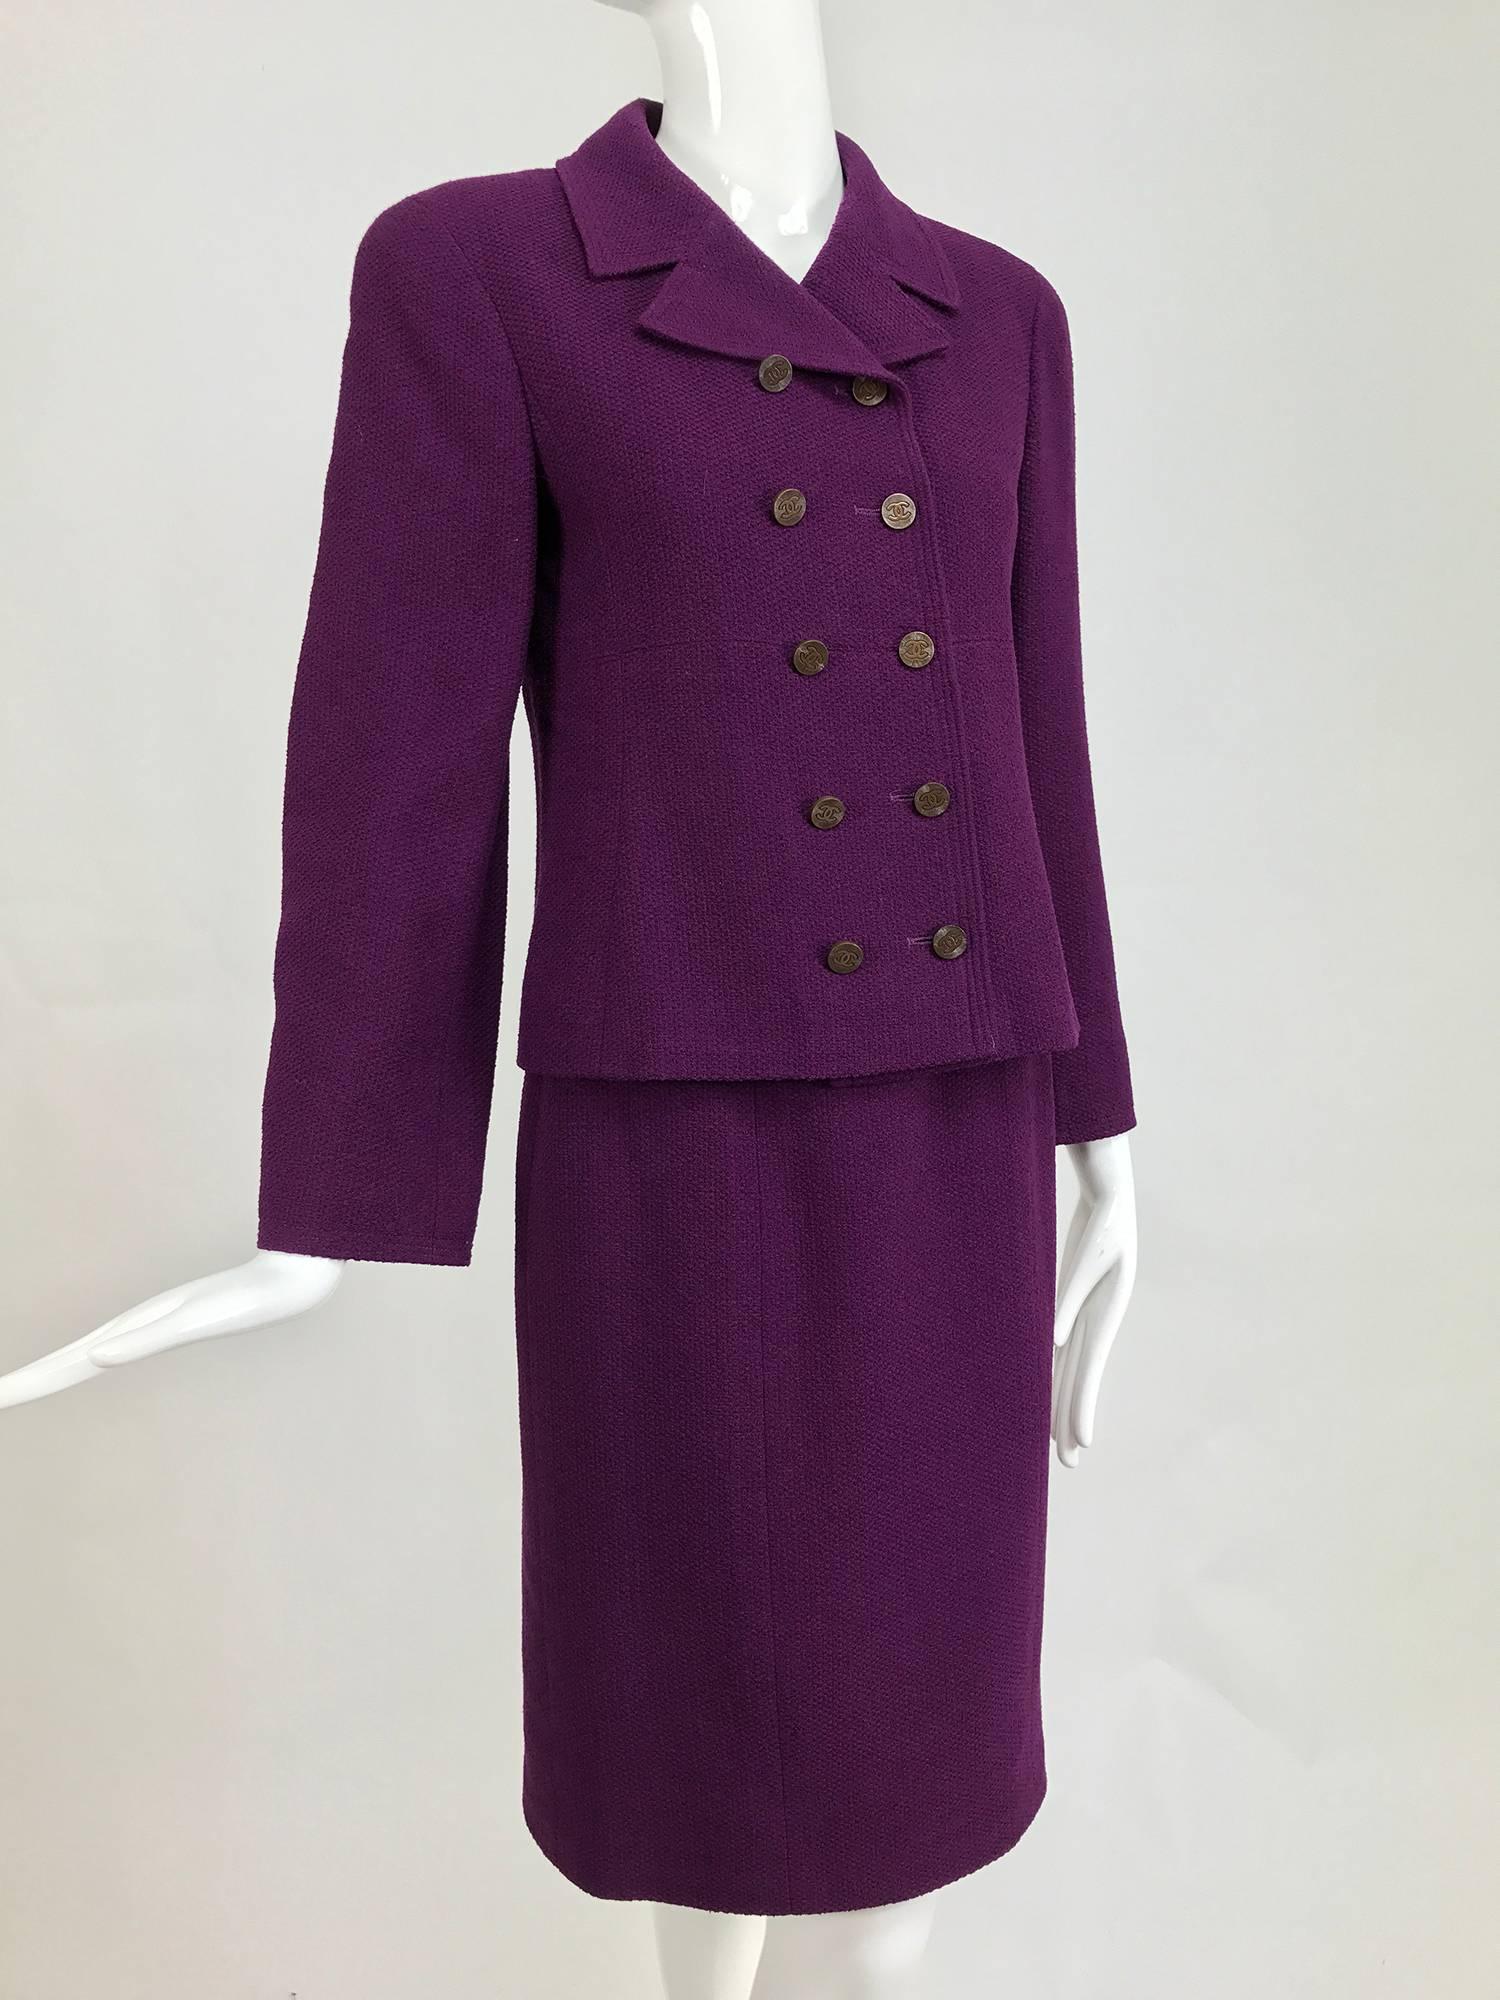 Chanel aubergine boucle classic double breasted skirt suit 1998A...Double breasted jacket with princess seams, high notched lapel, hip bone length, jacket is slightly fitted through the waist ...Long sleeves, closes with copper colour logo